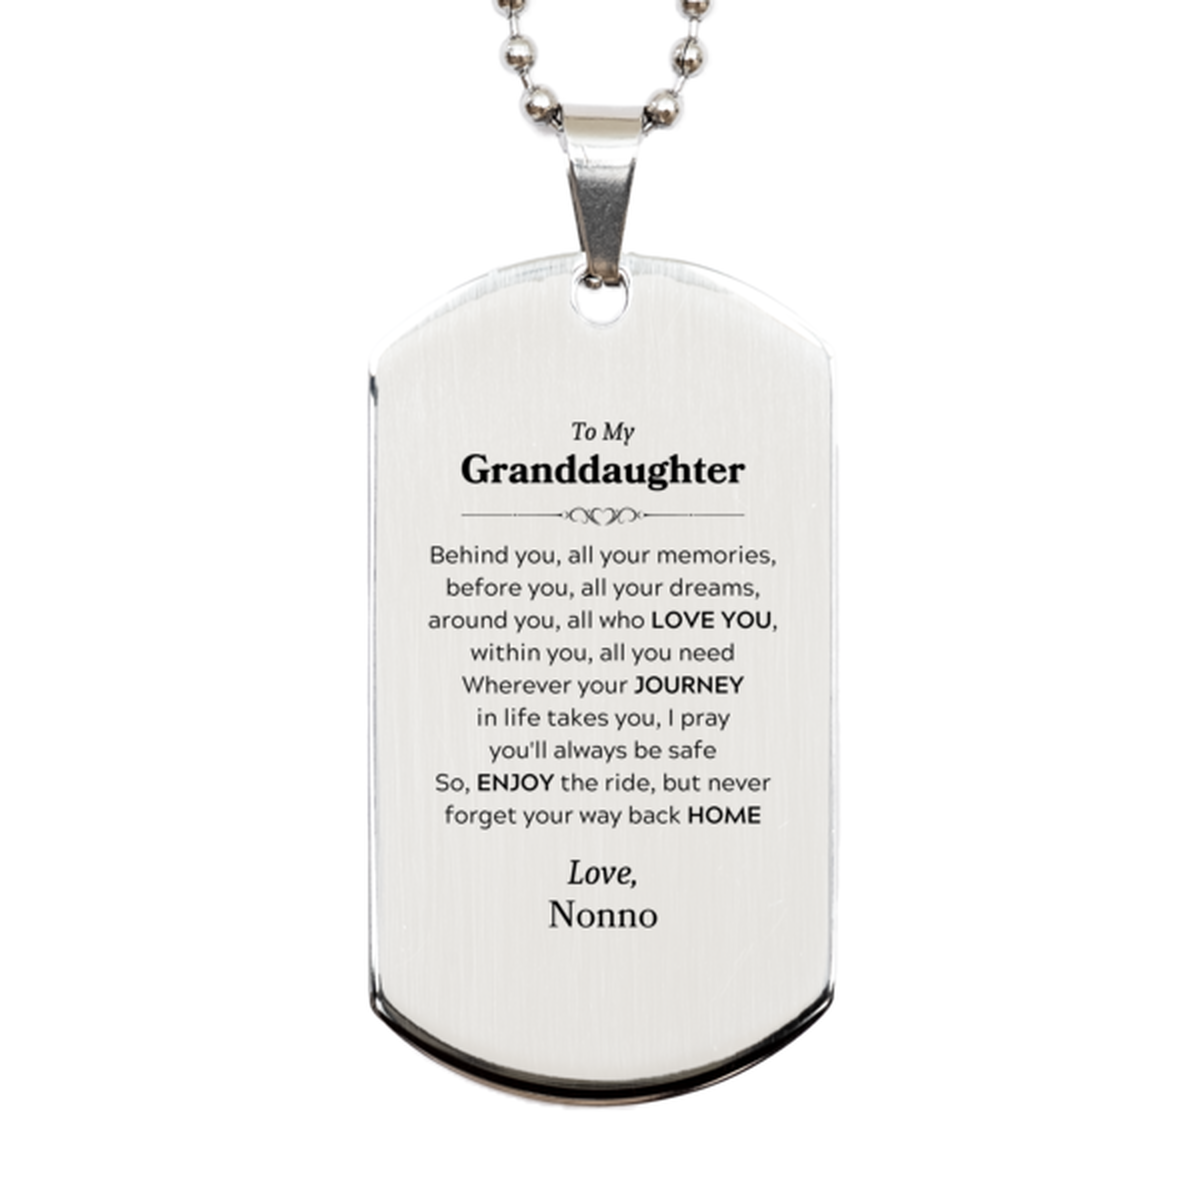 To My Granddaughter Graduation Gifts from Nonno, Granddaughter Silver Dog Tag Christmas Birthday Gifts for Granddaughter Behind you, all your memories, before you, all your dreams. Love, Nonno